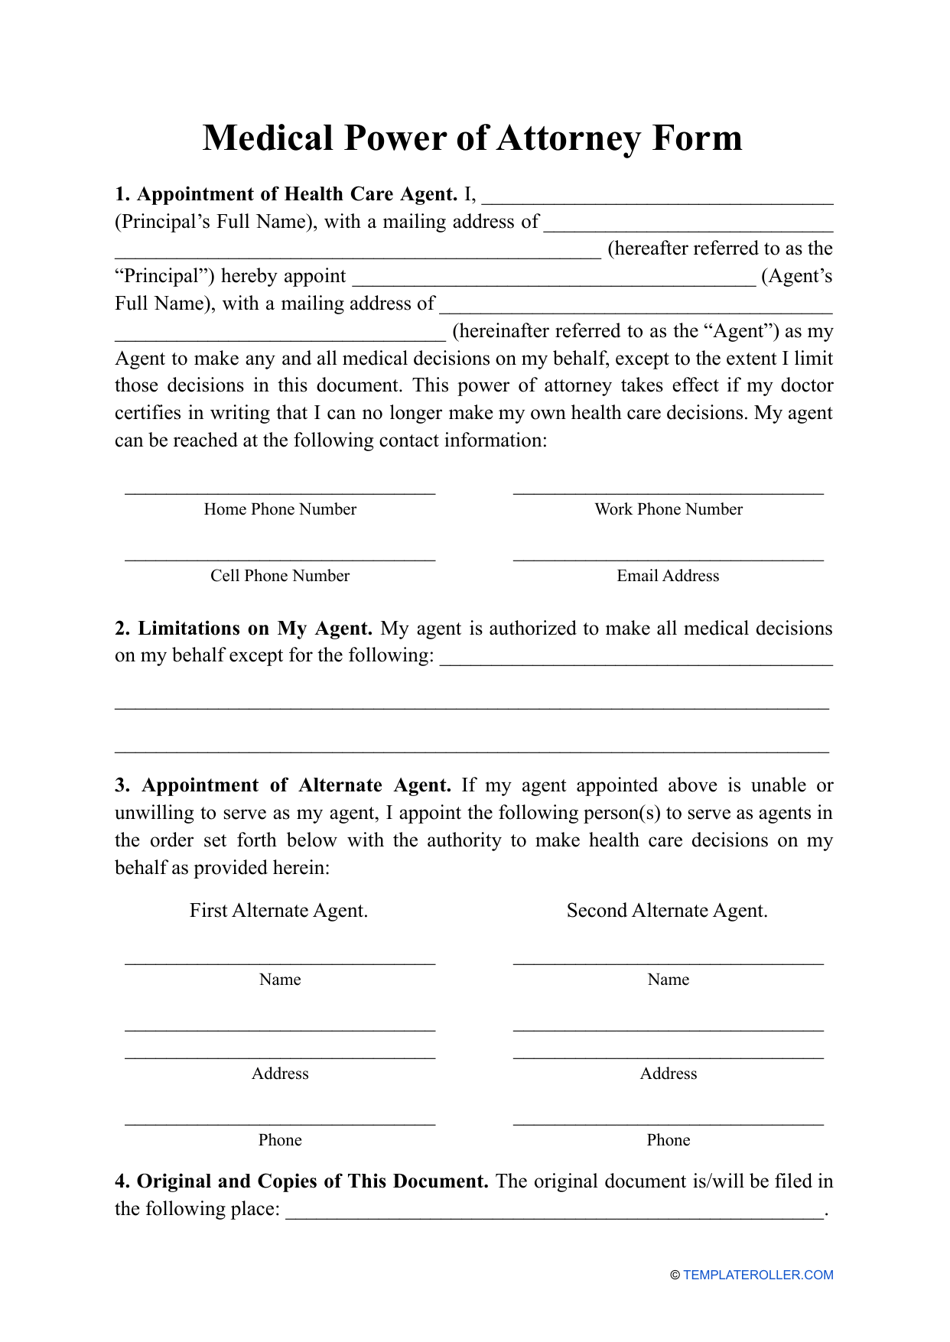 New Mexico Medical Power Of Attorney Form Fill Out Sign Online And Download Pdf Templateroller 0314